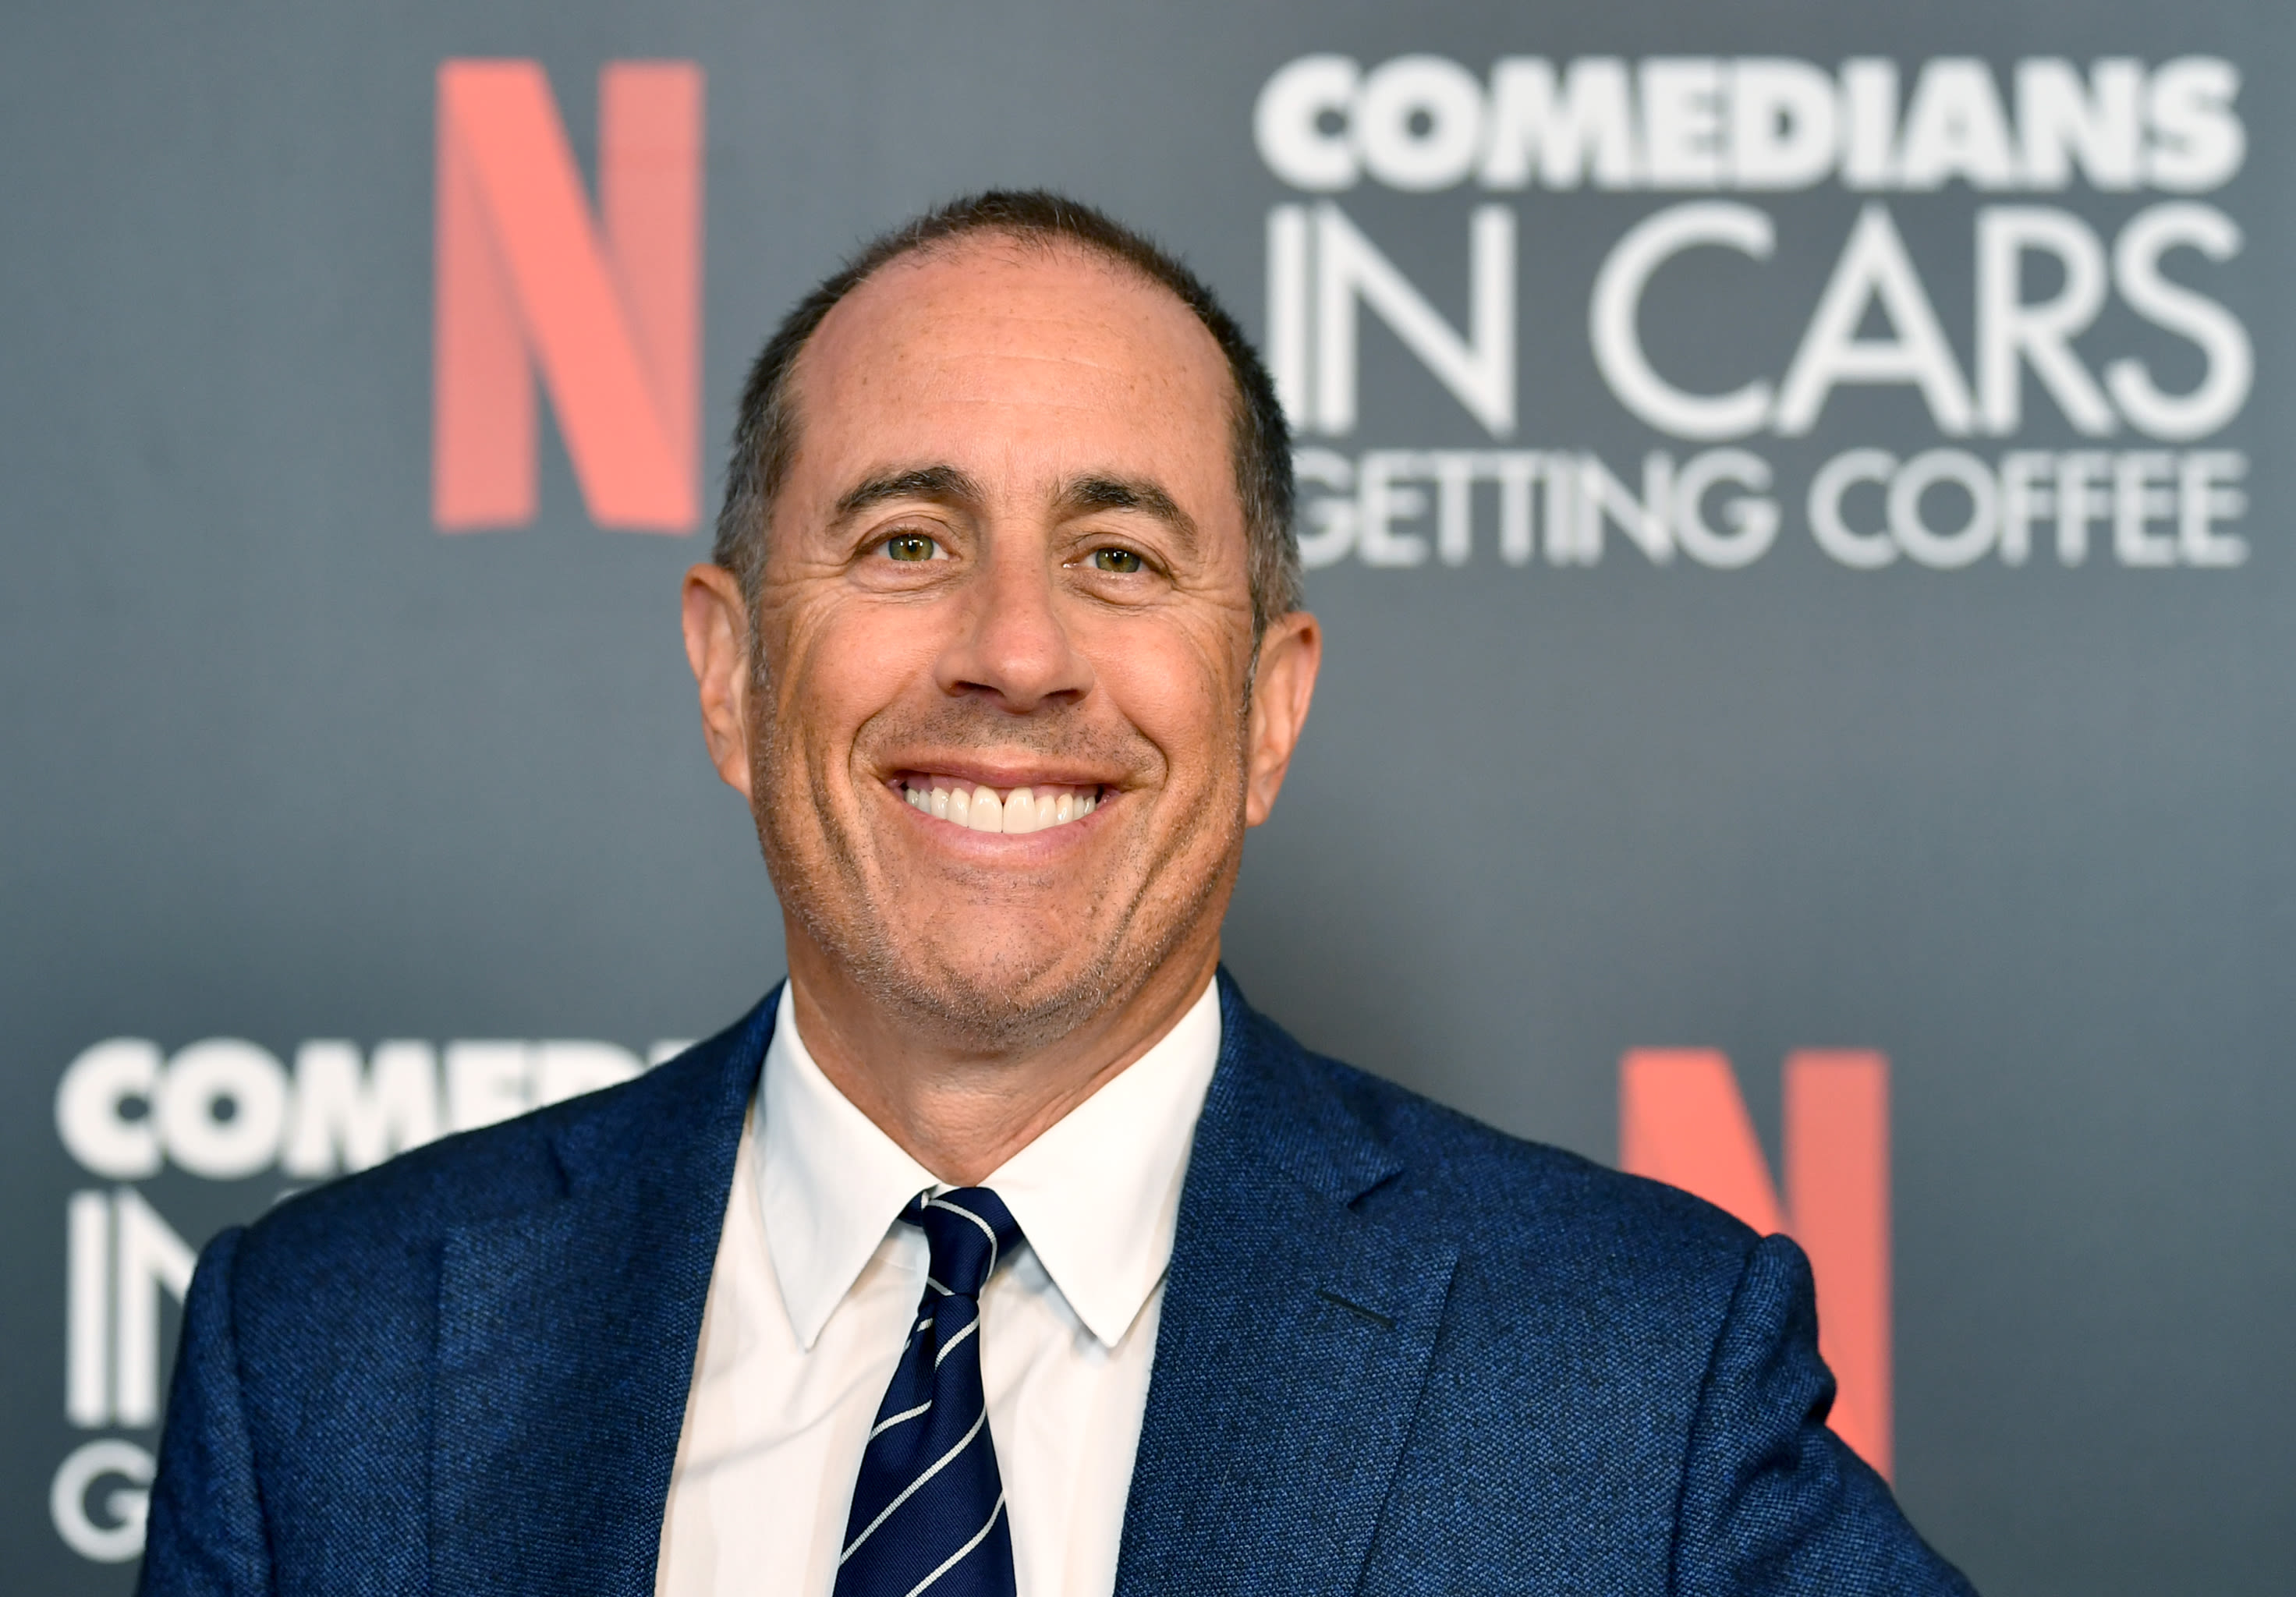 Jerry Seinfeld Says the ‘Movie Business Is Over’ and ‘Film Doesn’t Occupy the Pinnacle in the Cultural Hierarchy’ Anymore: ‘Disorientation...